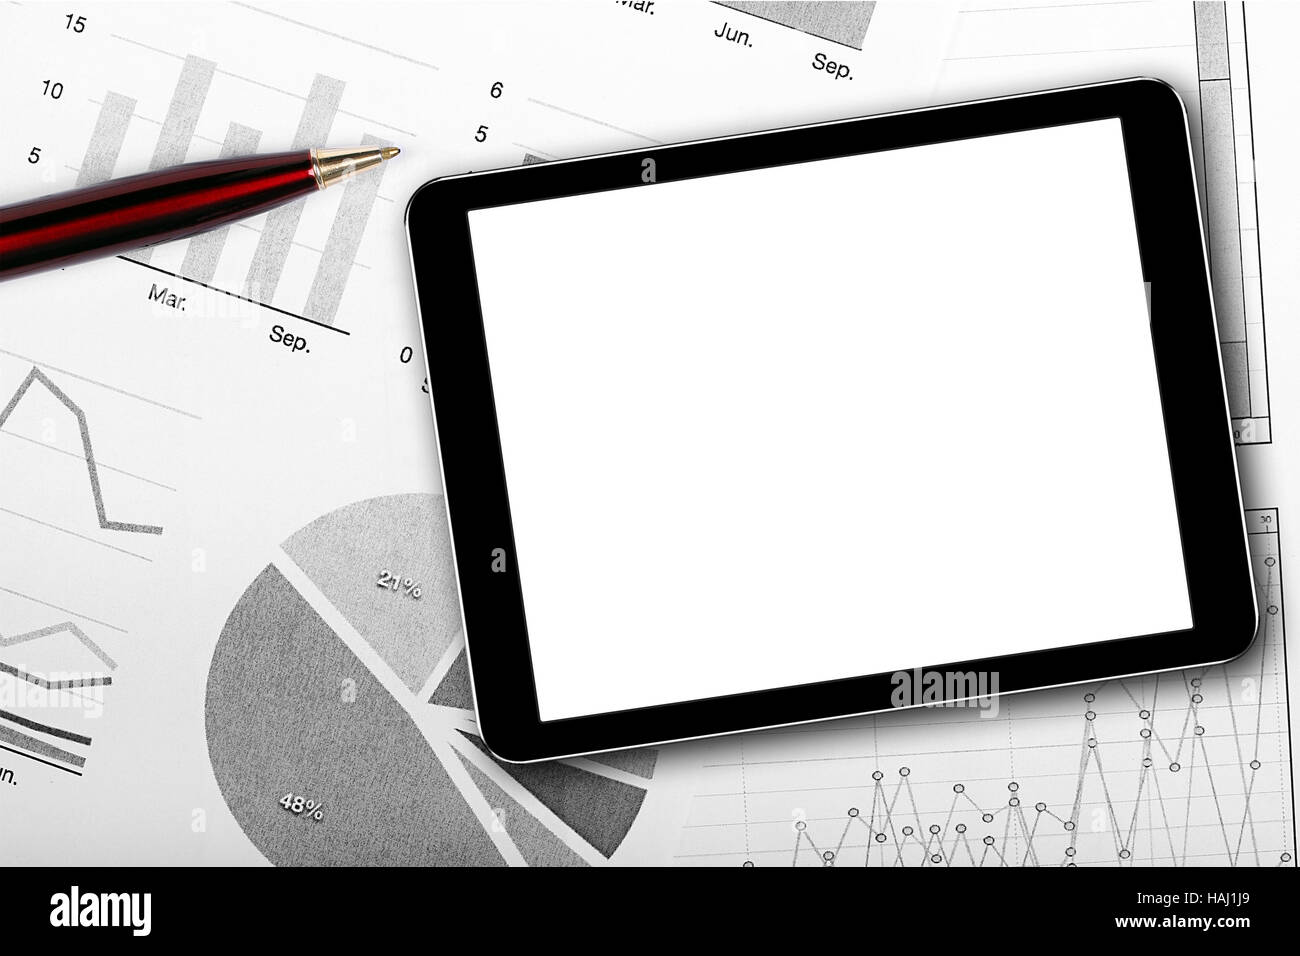 blank digital tablet on business documents Stock Photo